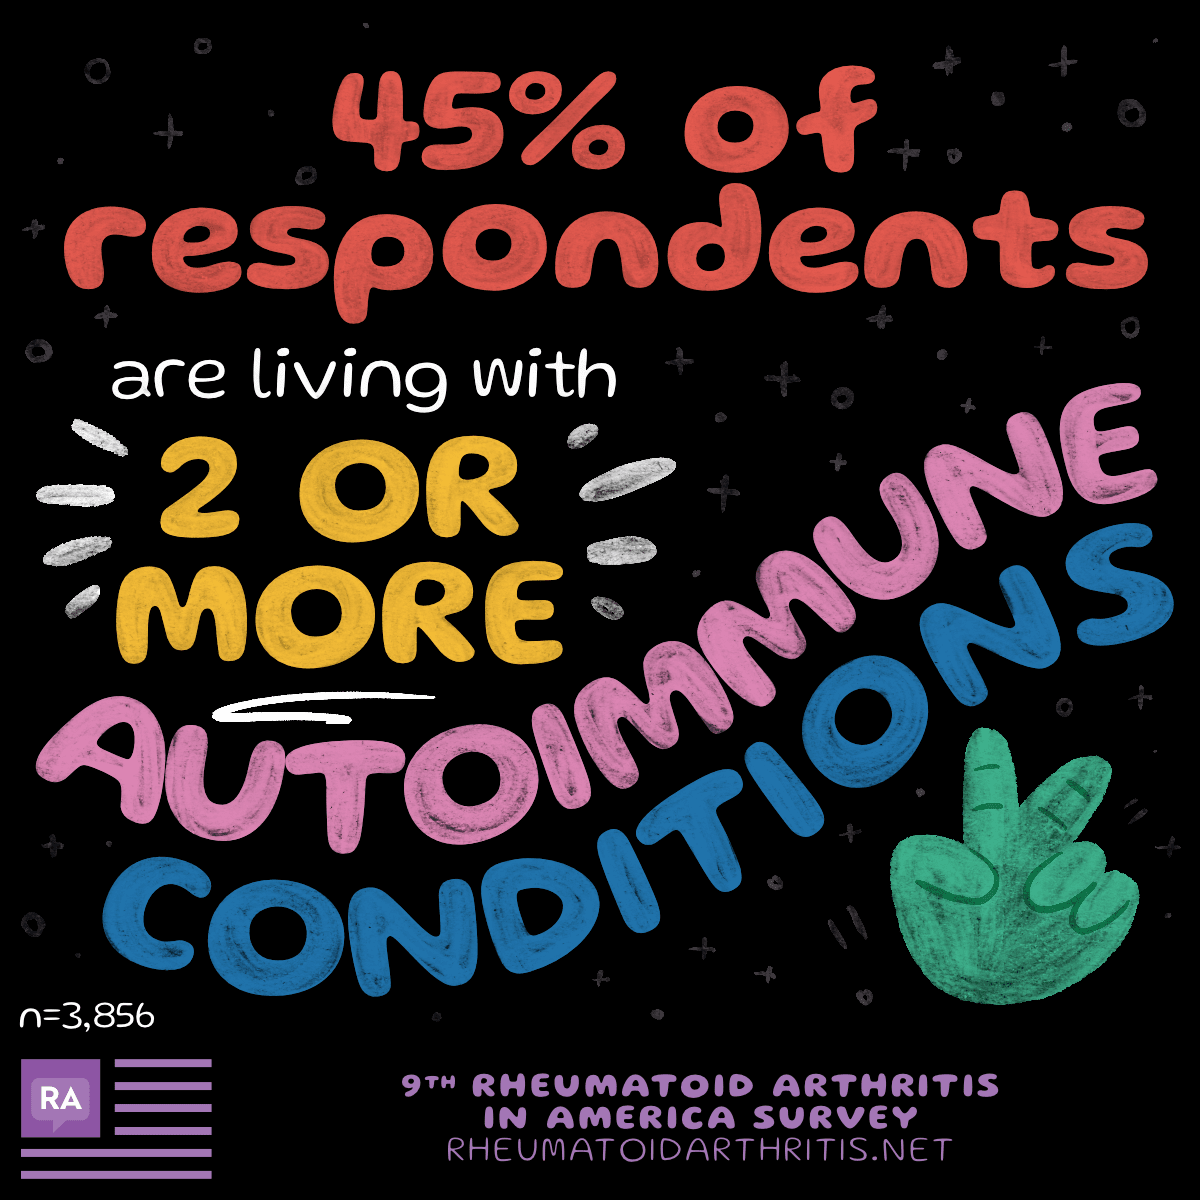 Percentage of people living with 2 or more autoimmune conditions.